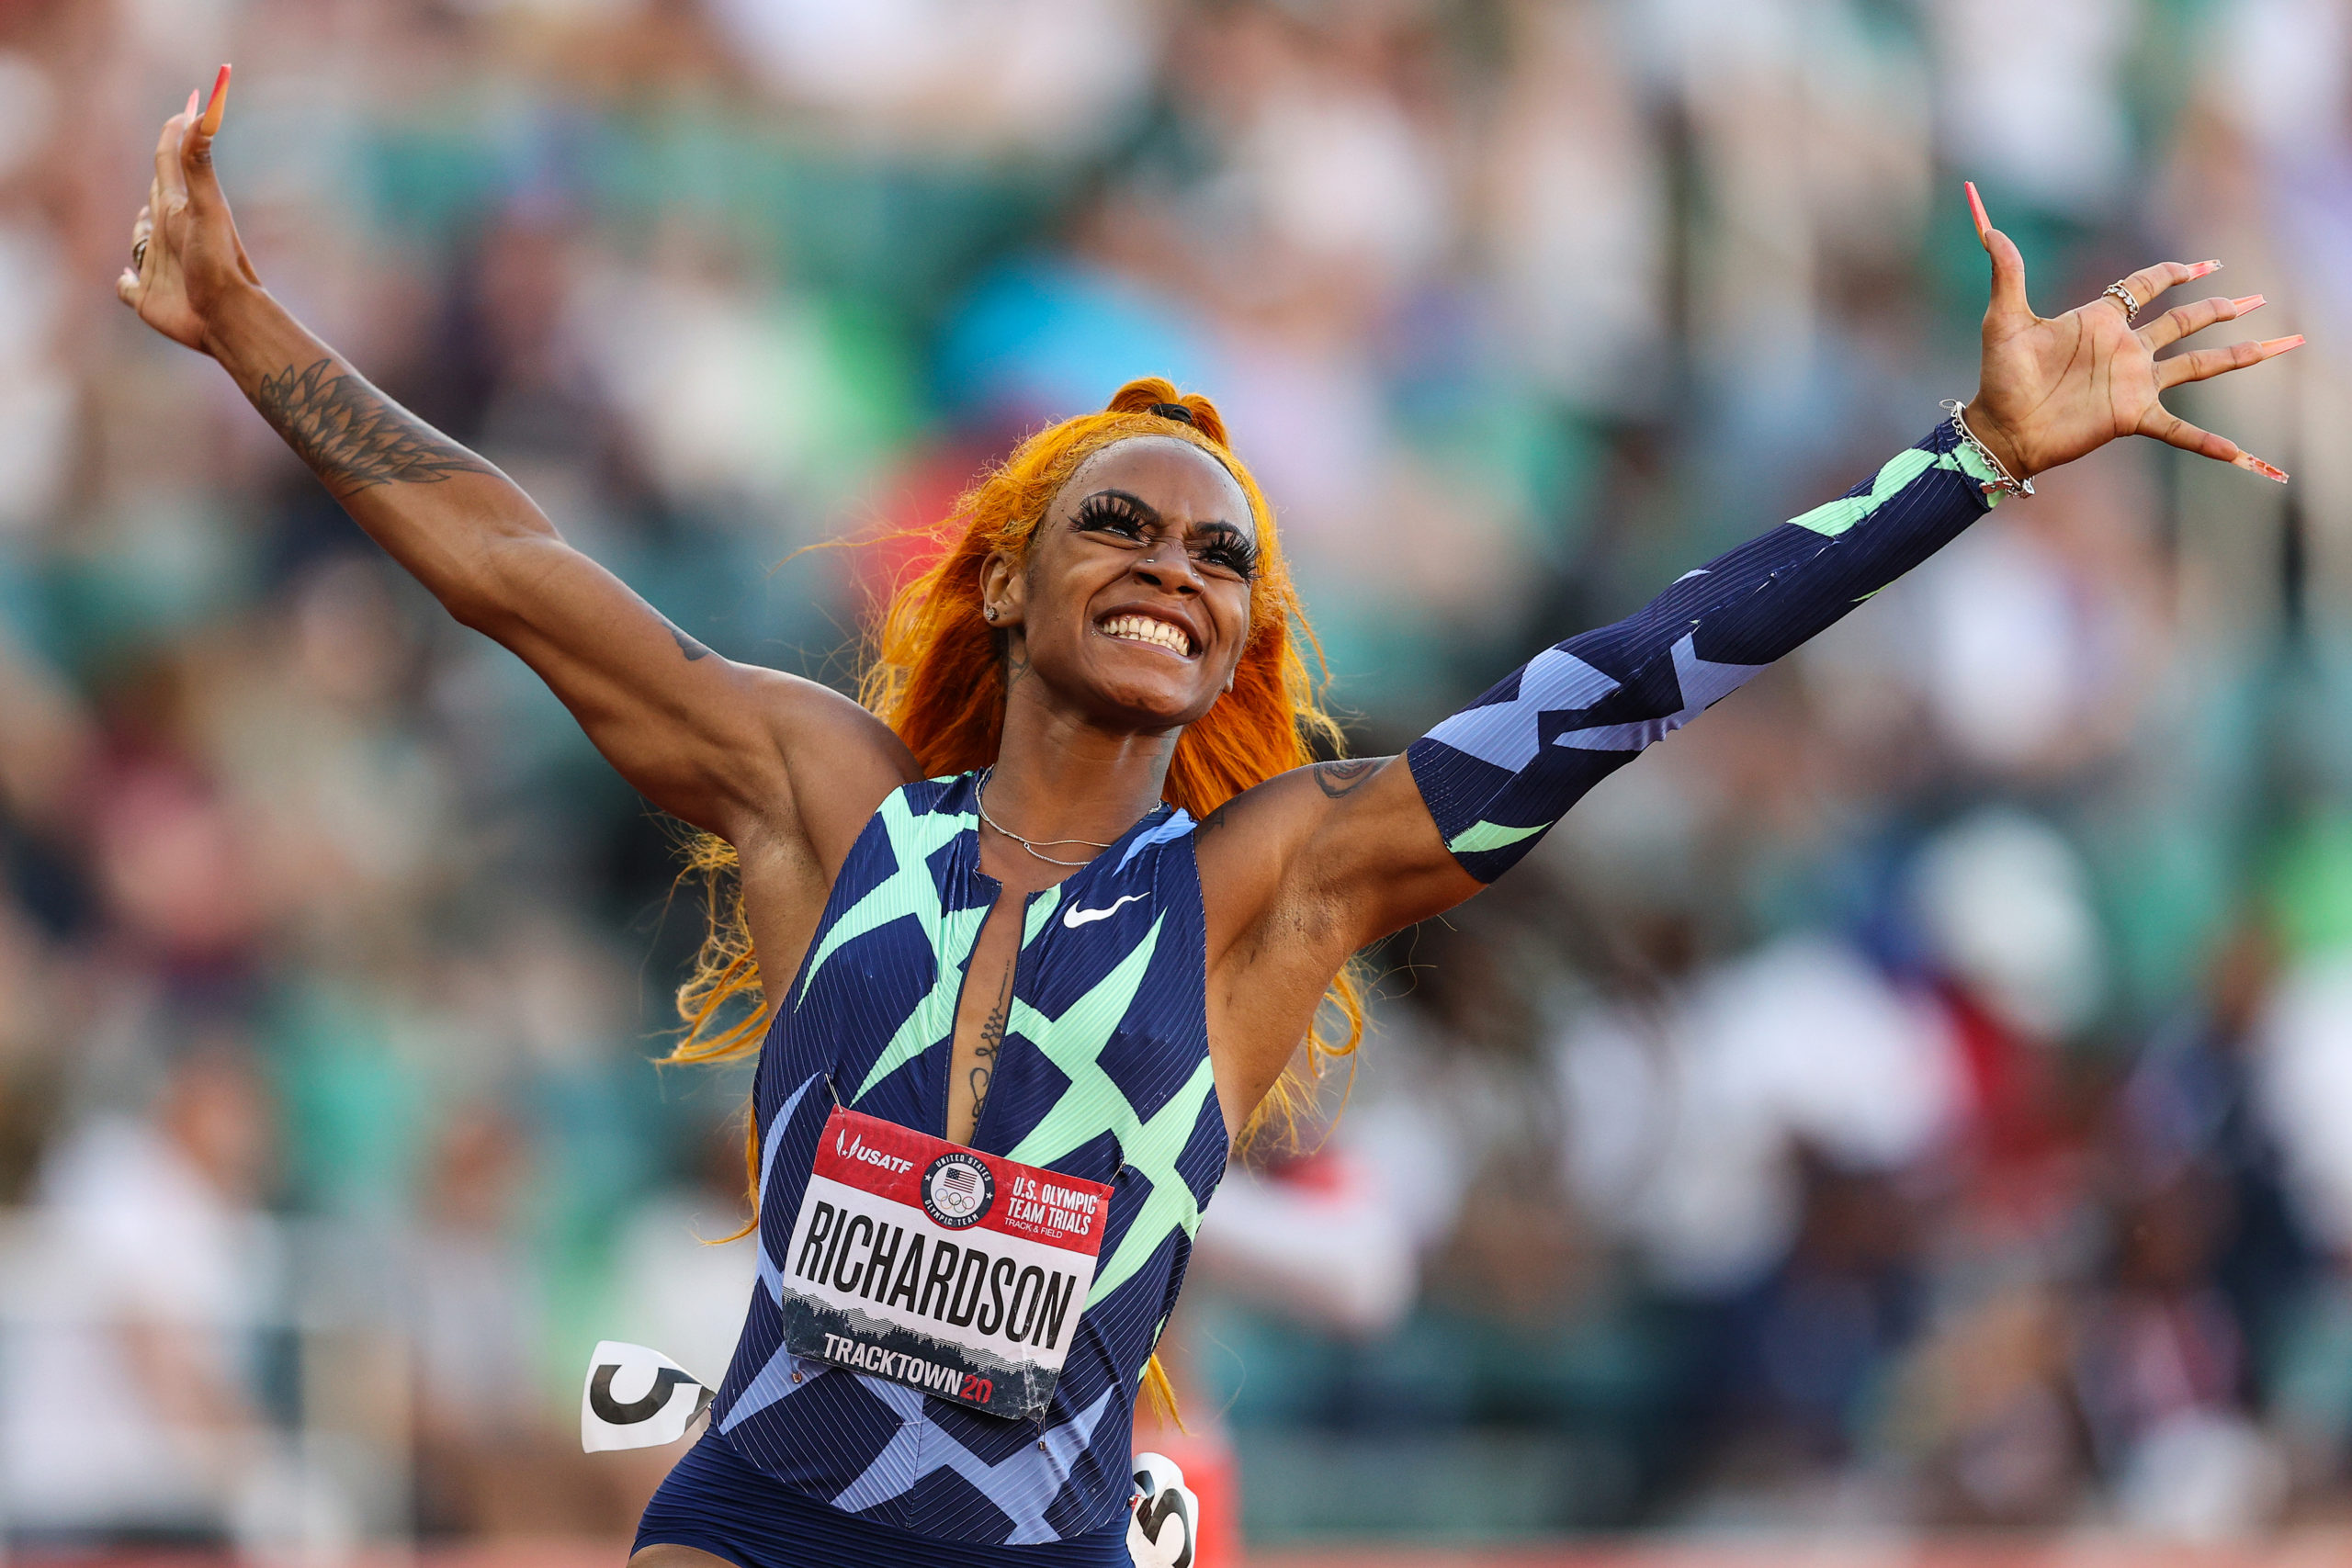 Sha'Carri Richardson's Blue Hair Causes Controversy at Olympic Trials - wide 6